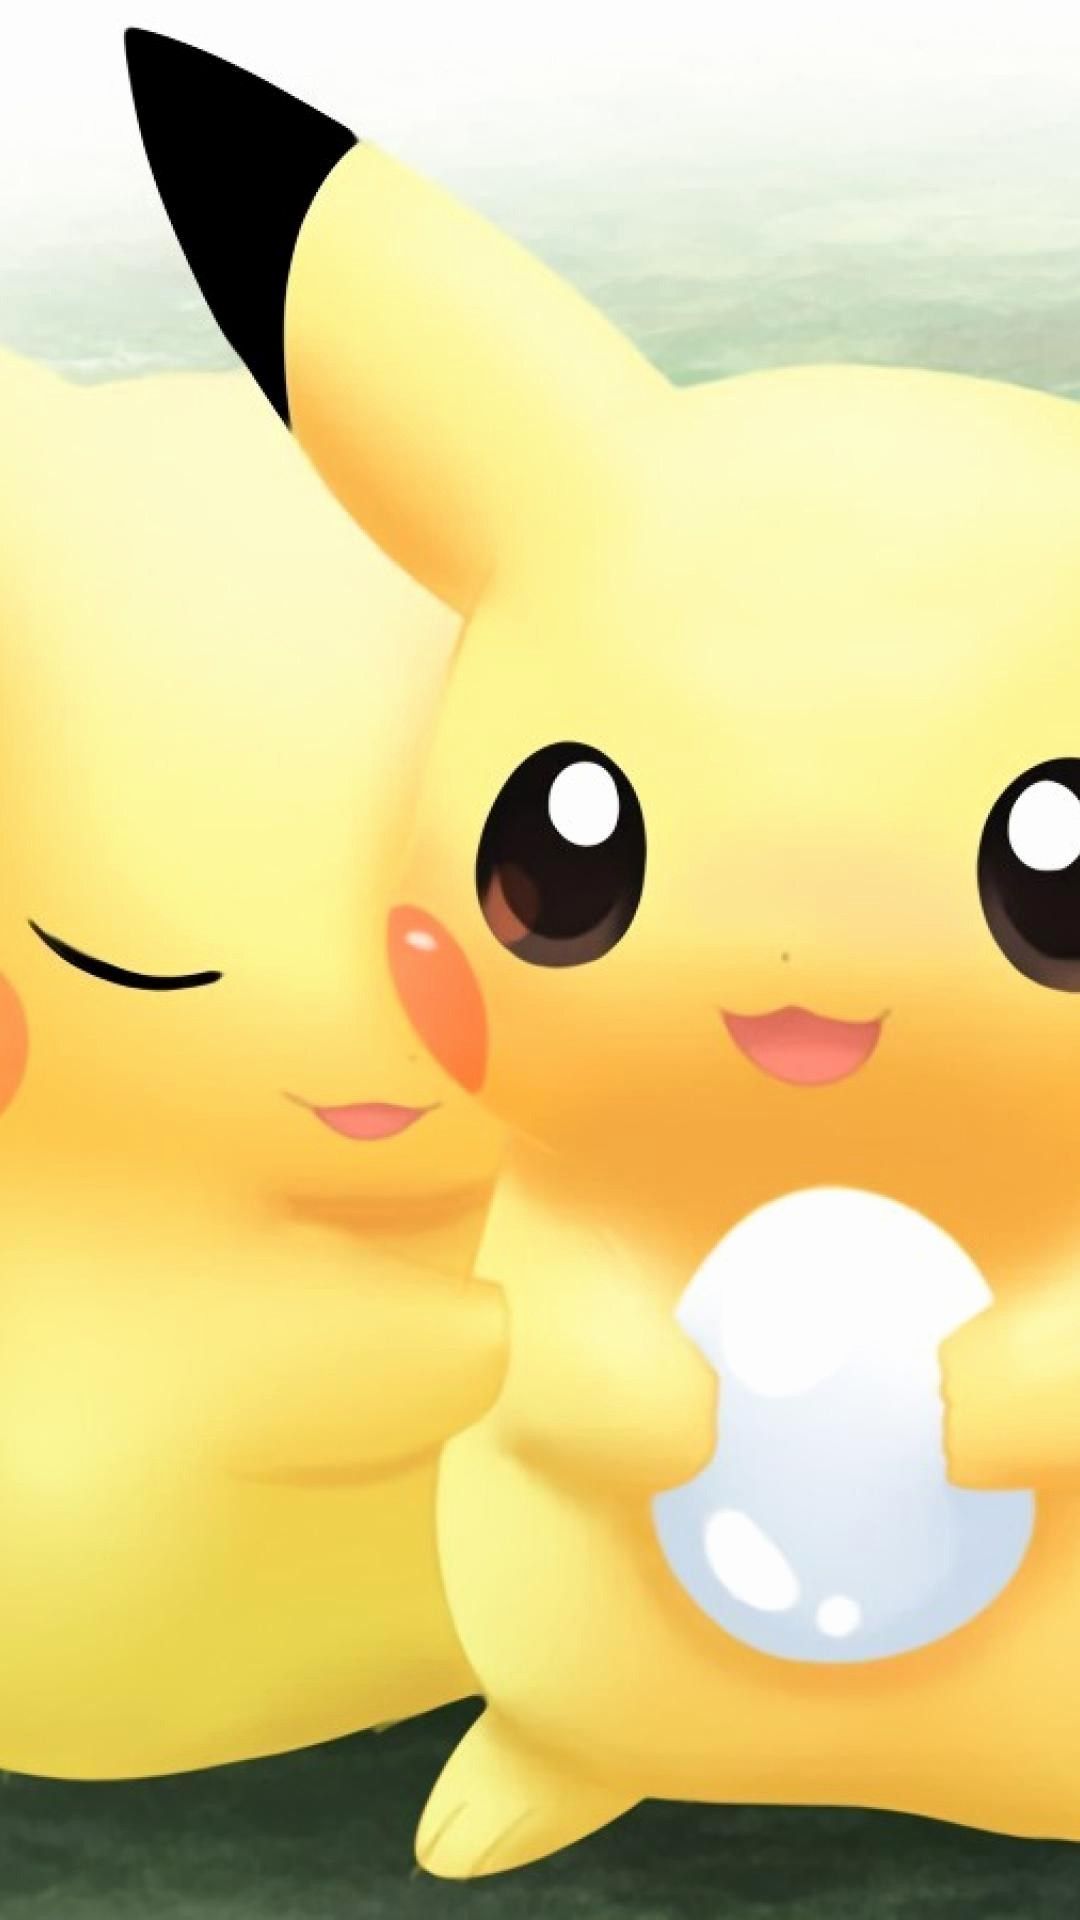 Really Cute Pikachu Wallpapers on WallpaperDog